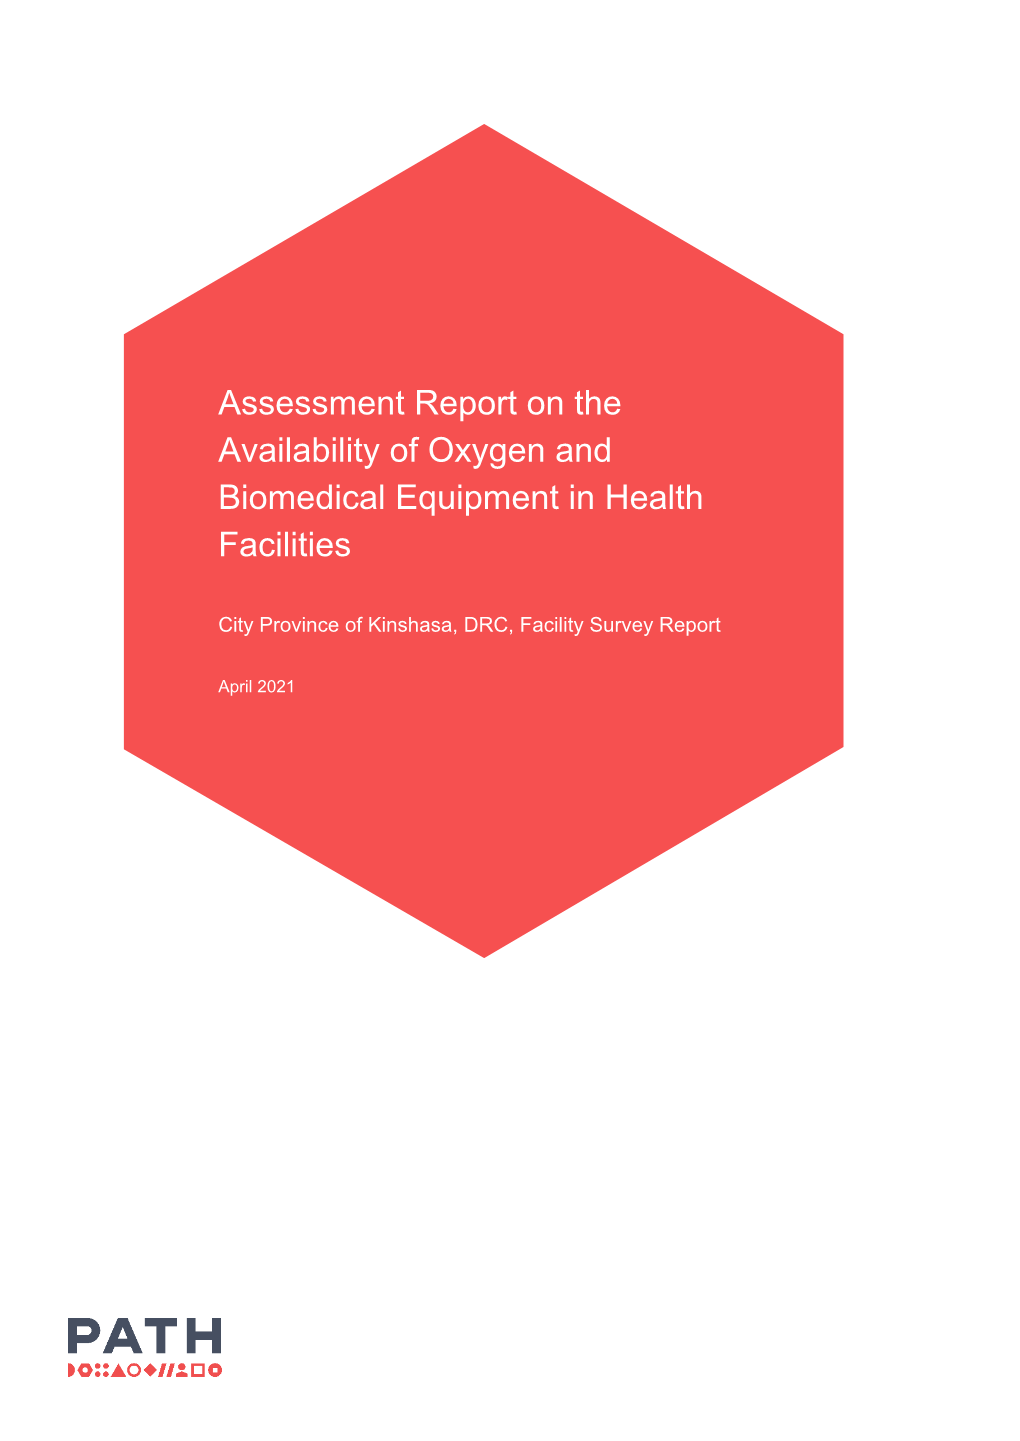 Assessment Report on the Availability of Oxygen and Biomedical Equipment in Health Facilities